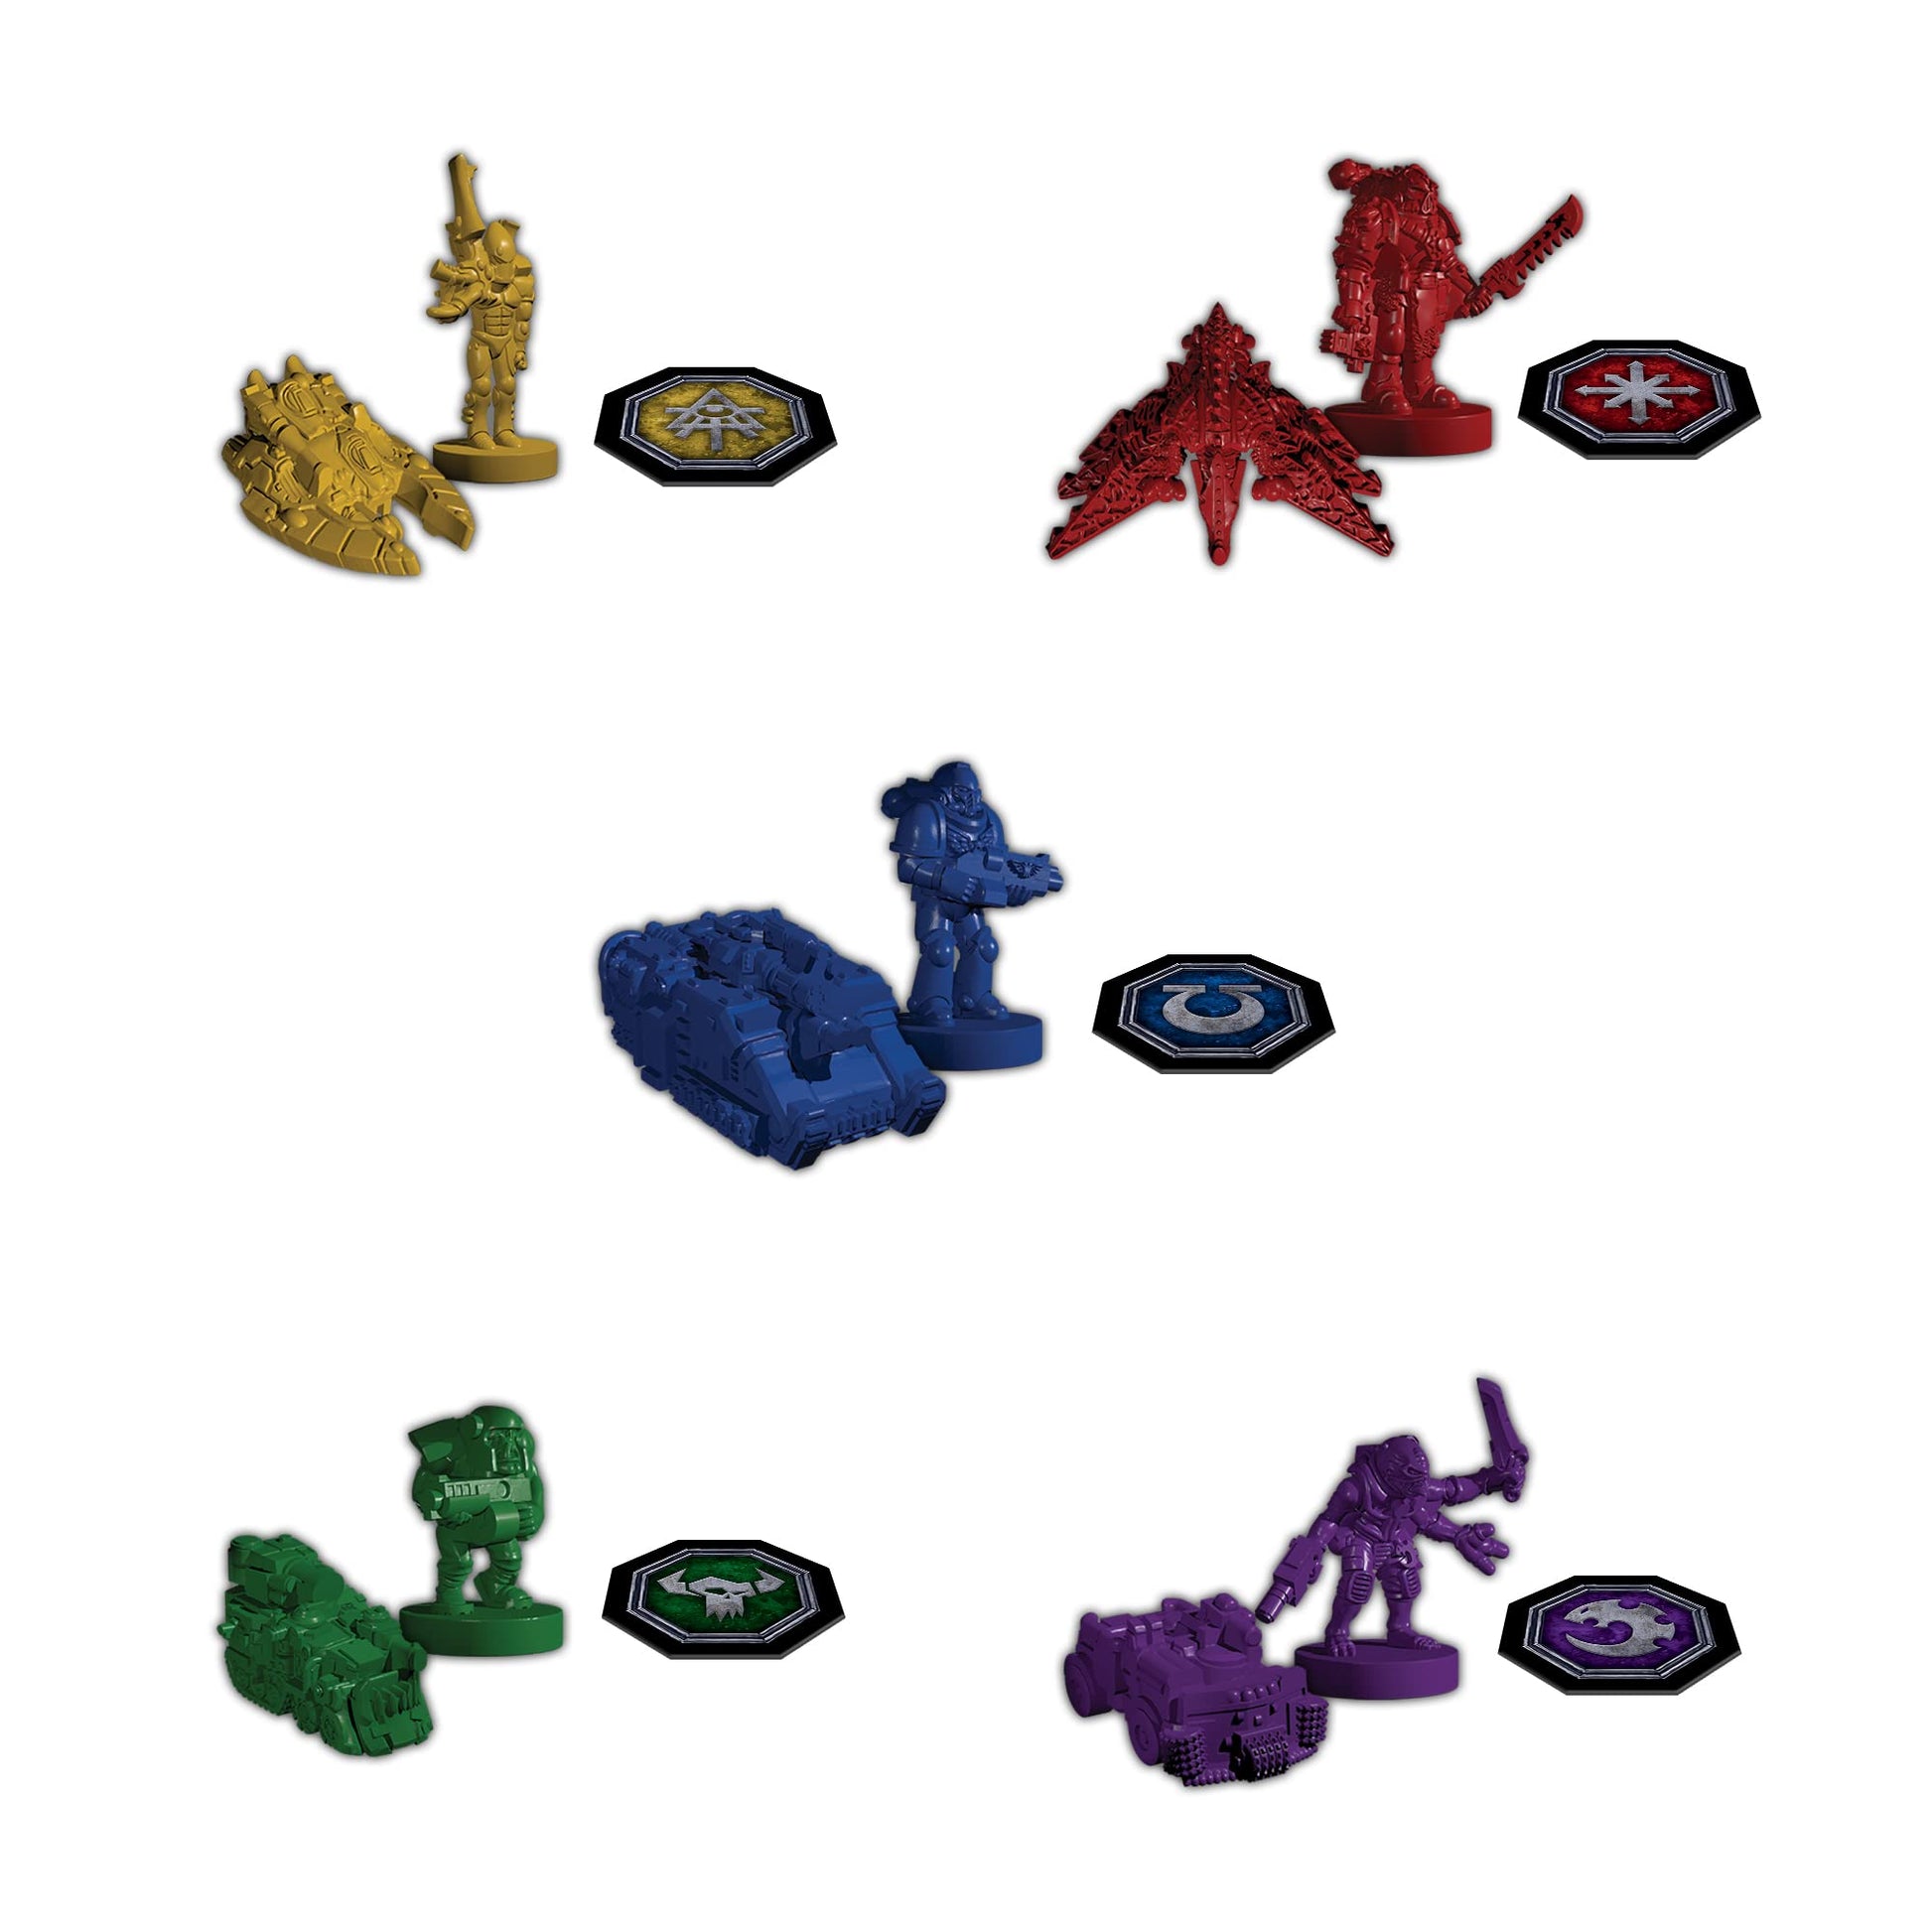 Warhammer RISK Strategy Board Game , Explore Planet Vigilus and form your army and battle the likes of Orks and Ultramarines with custom game pieces - Zippigames